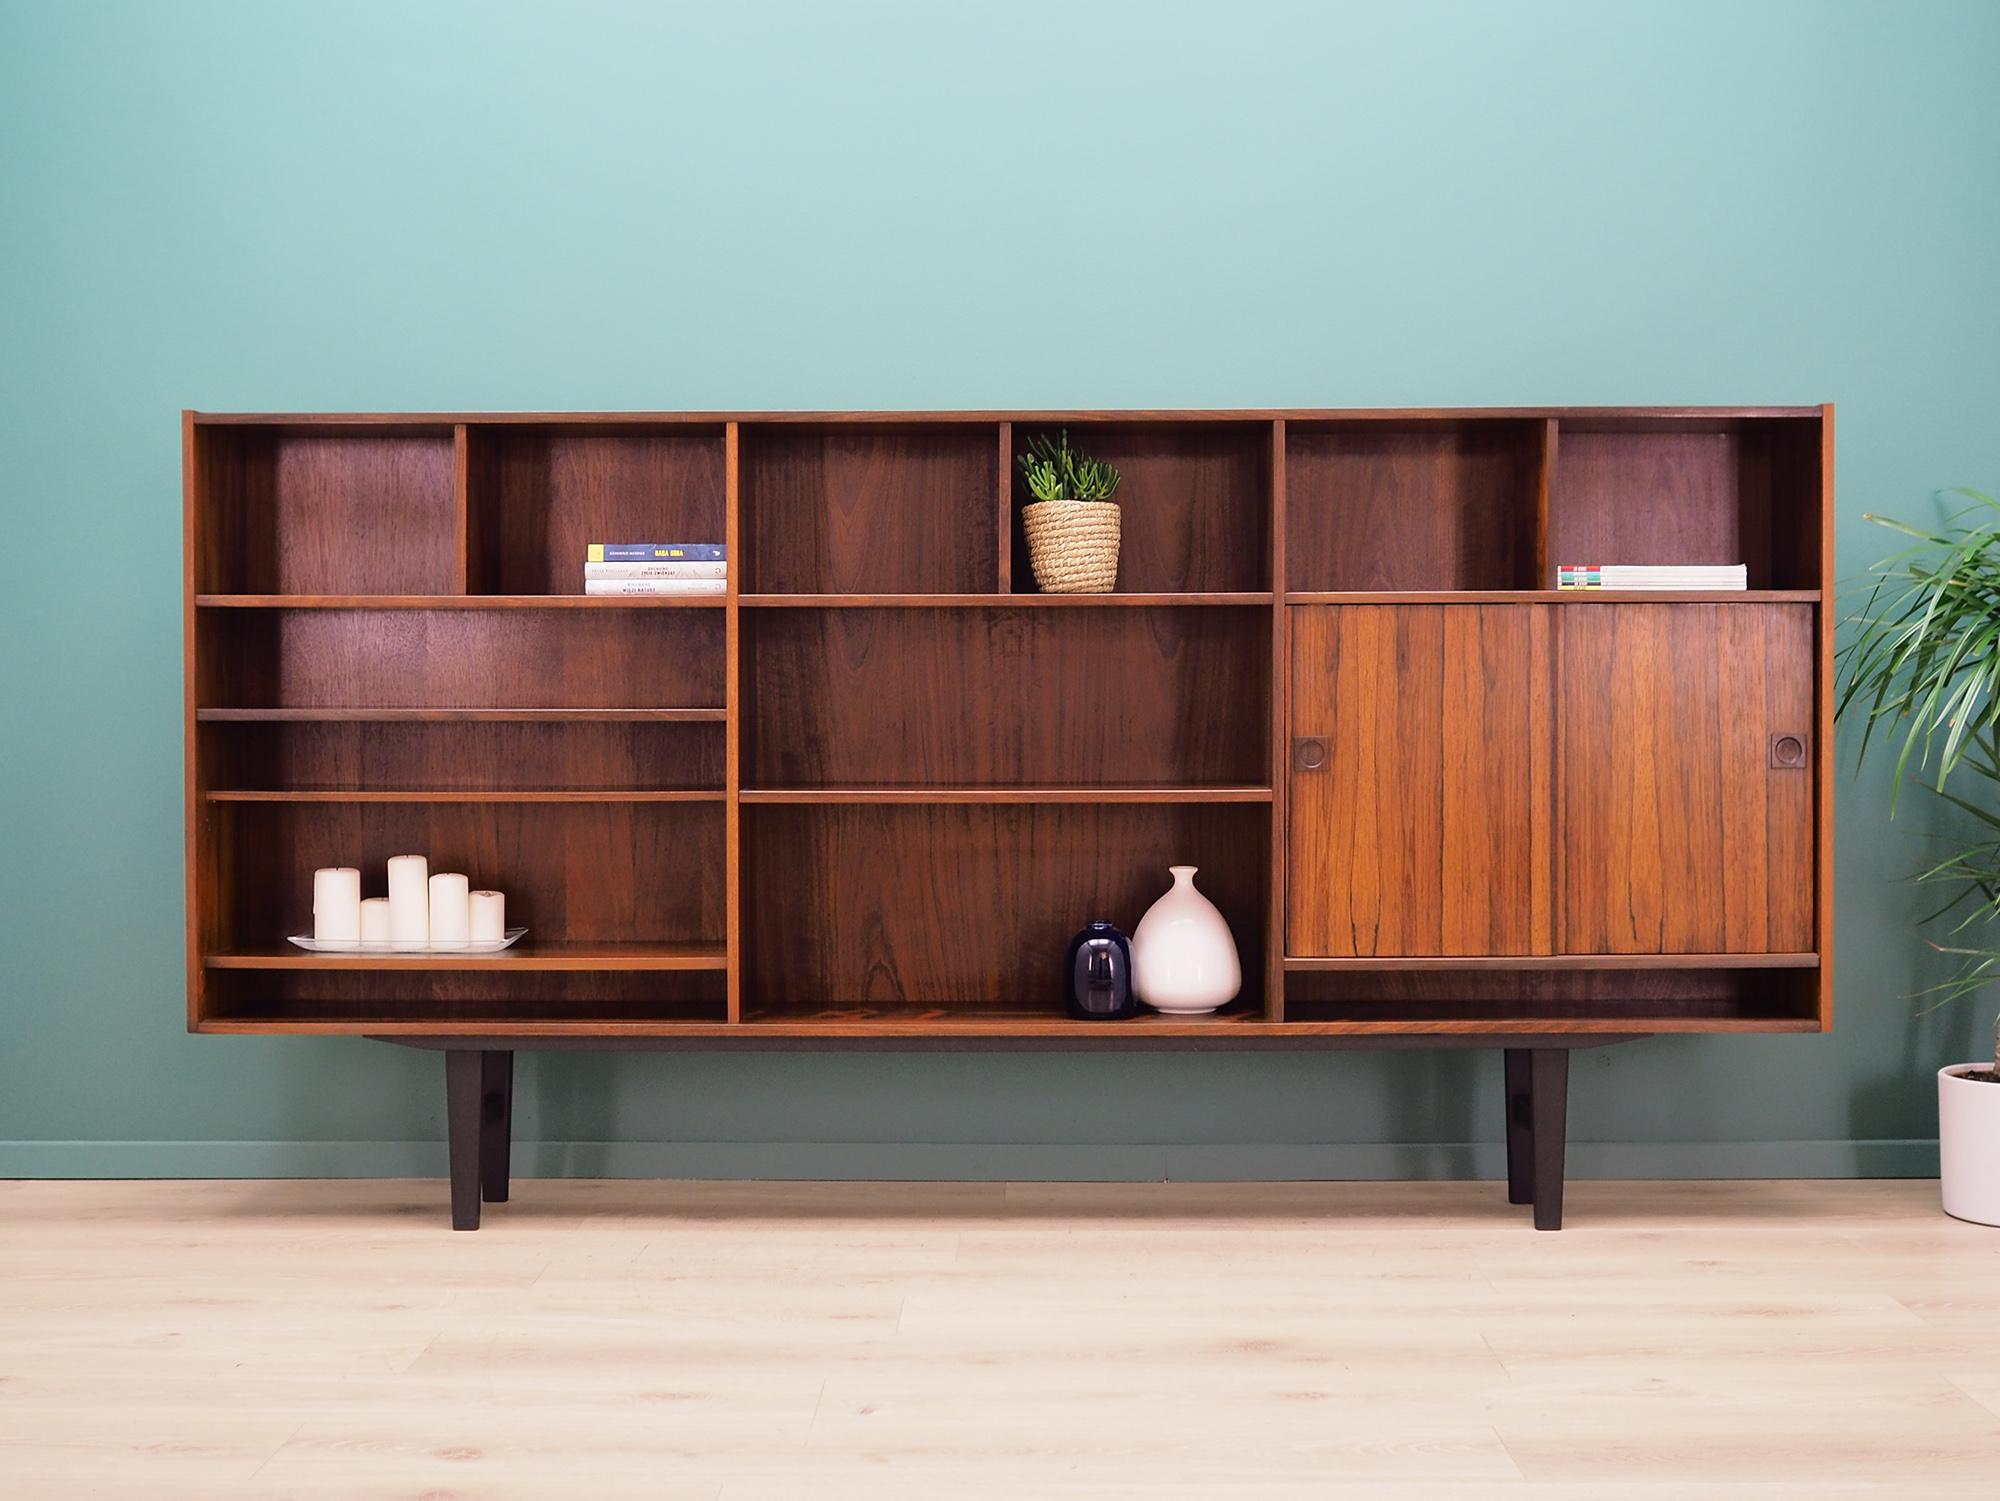 Bookcase was made in the 1960s by the well-known Danish furniture producer Farsø Møbelfabrik.

The structure is covered with rosewood veneer. Legs made of solid wood are black coloured. Surface after refreshing. Inside the space has been filled